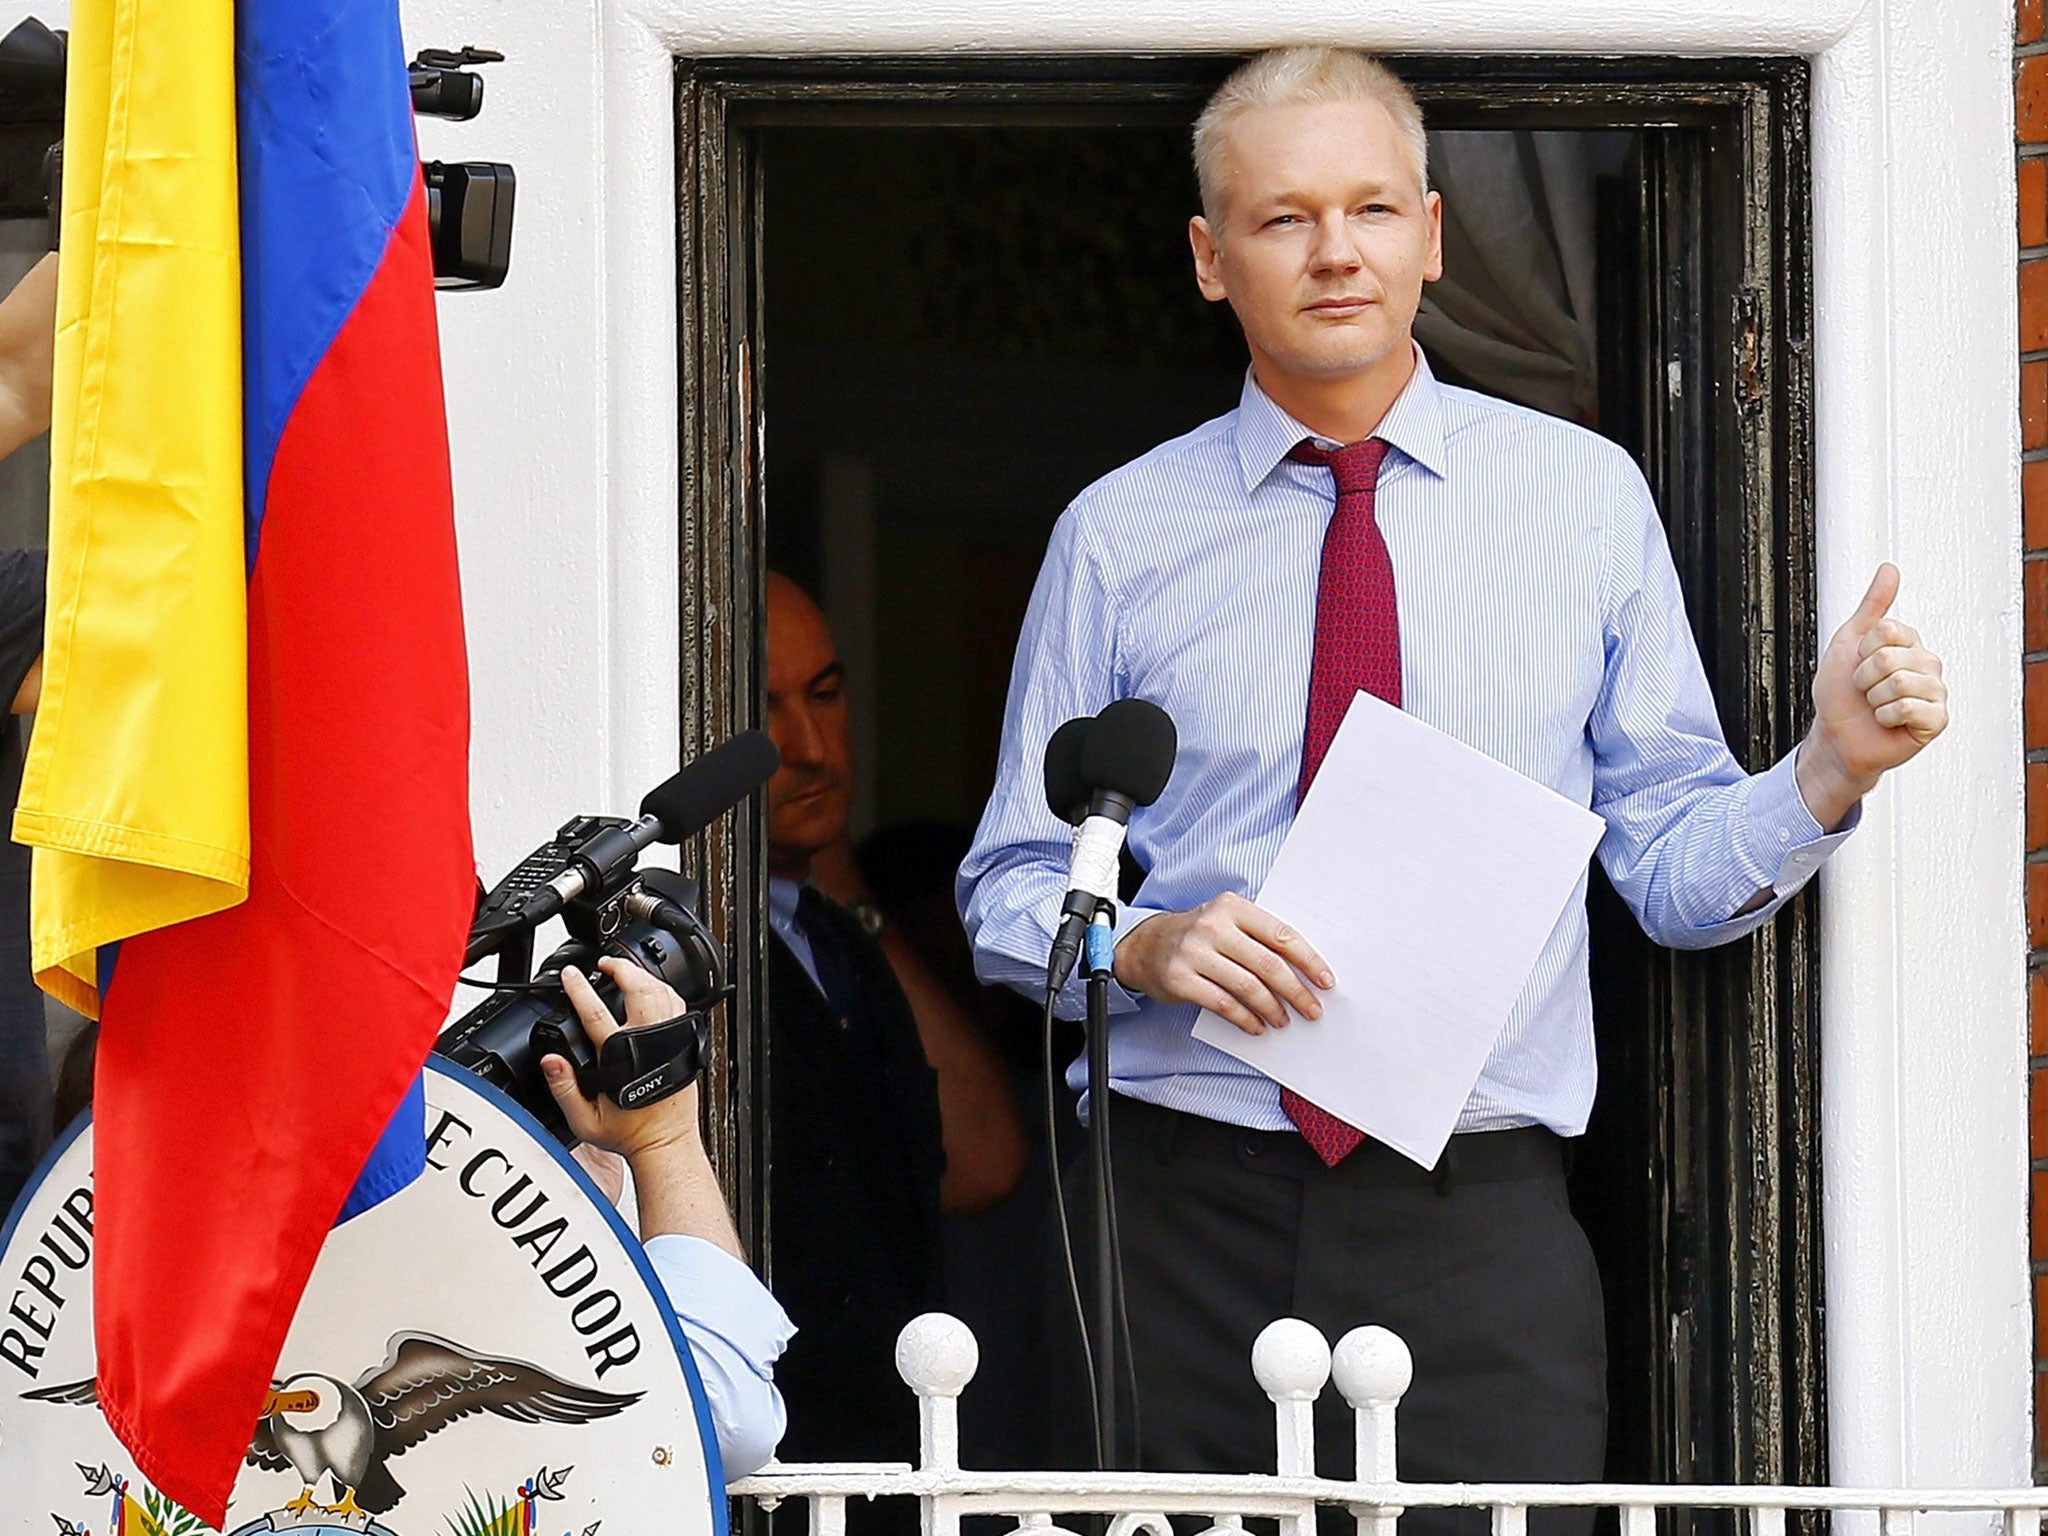 Assange is collaborating with the hip-hop band Calle 13